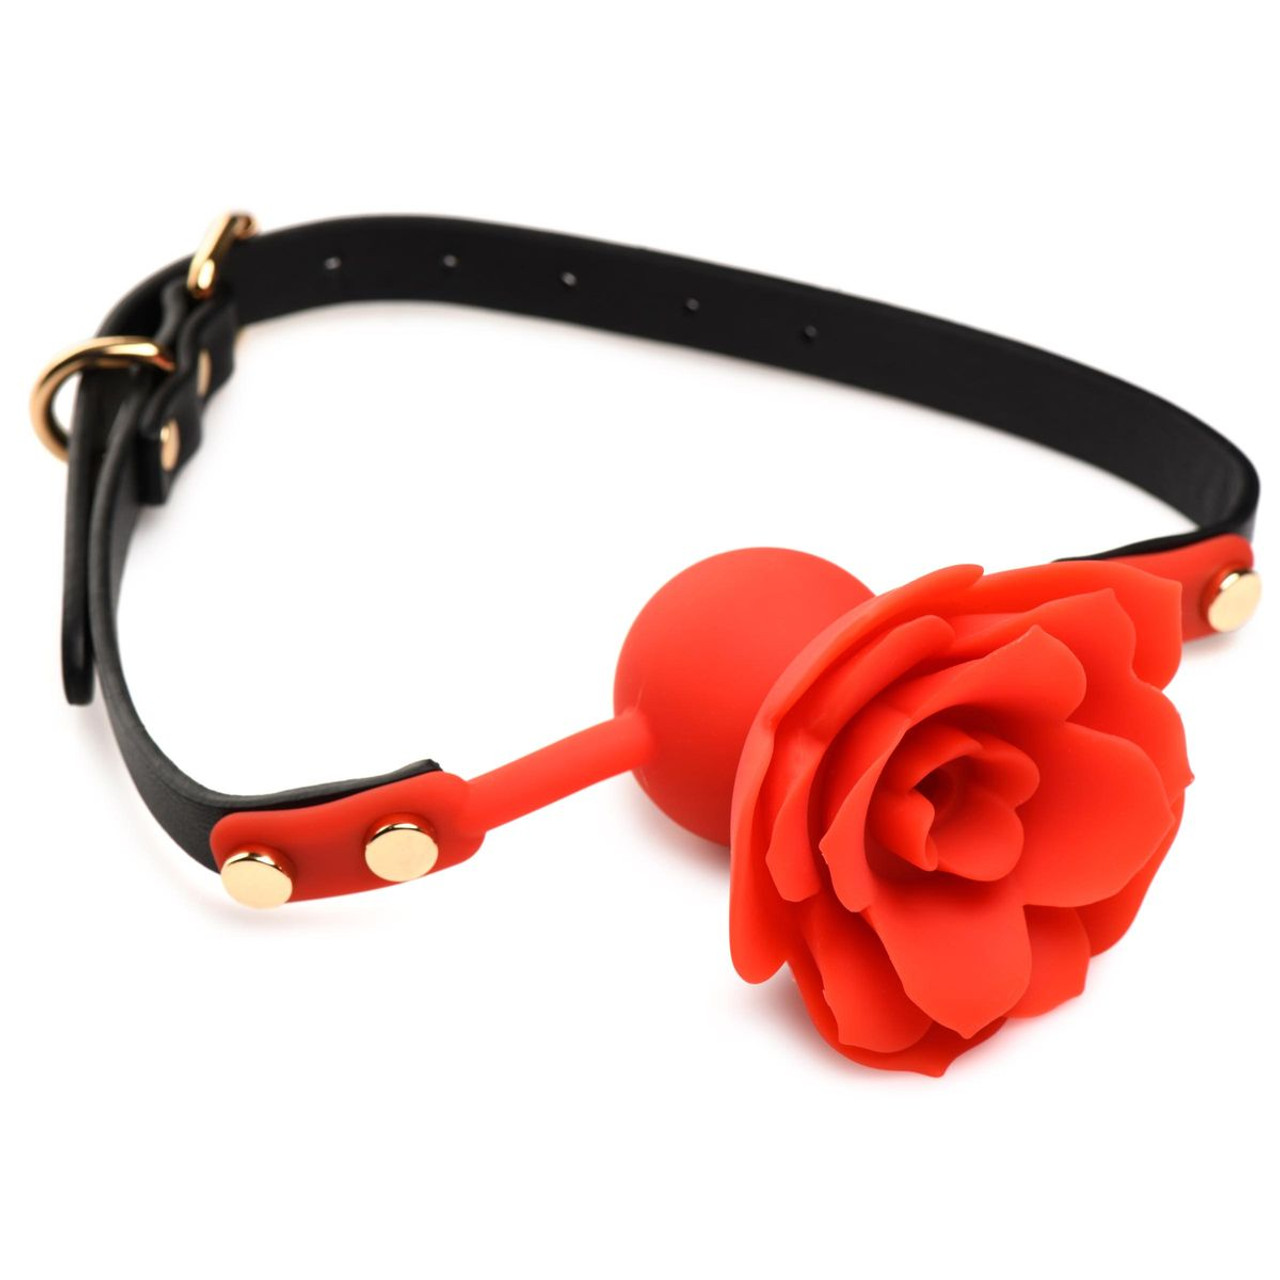 Master Series Blossom Silicone Rose Ball Gag product image